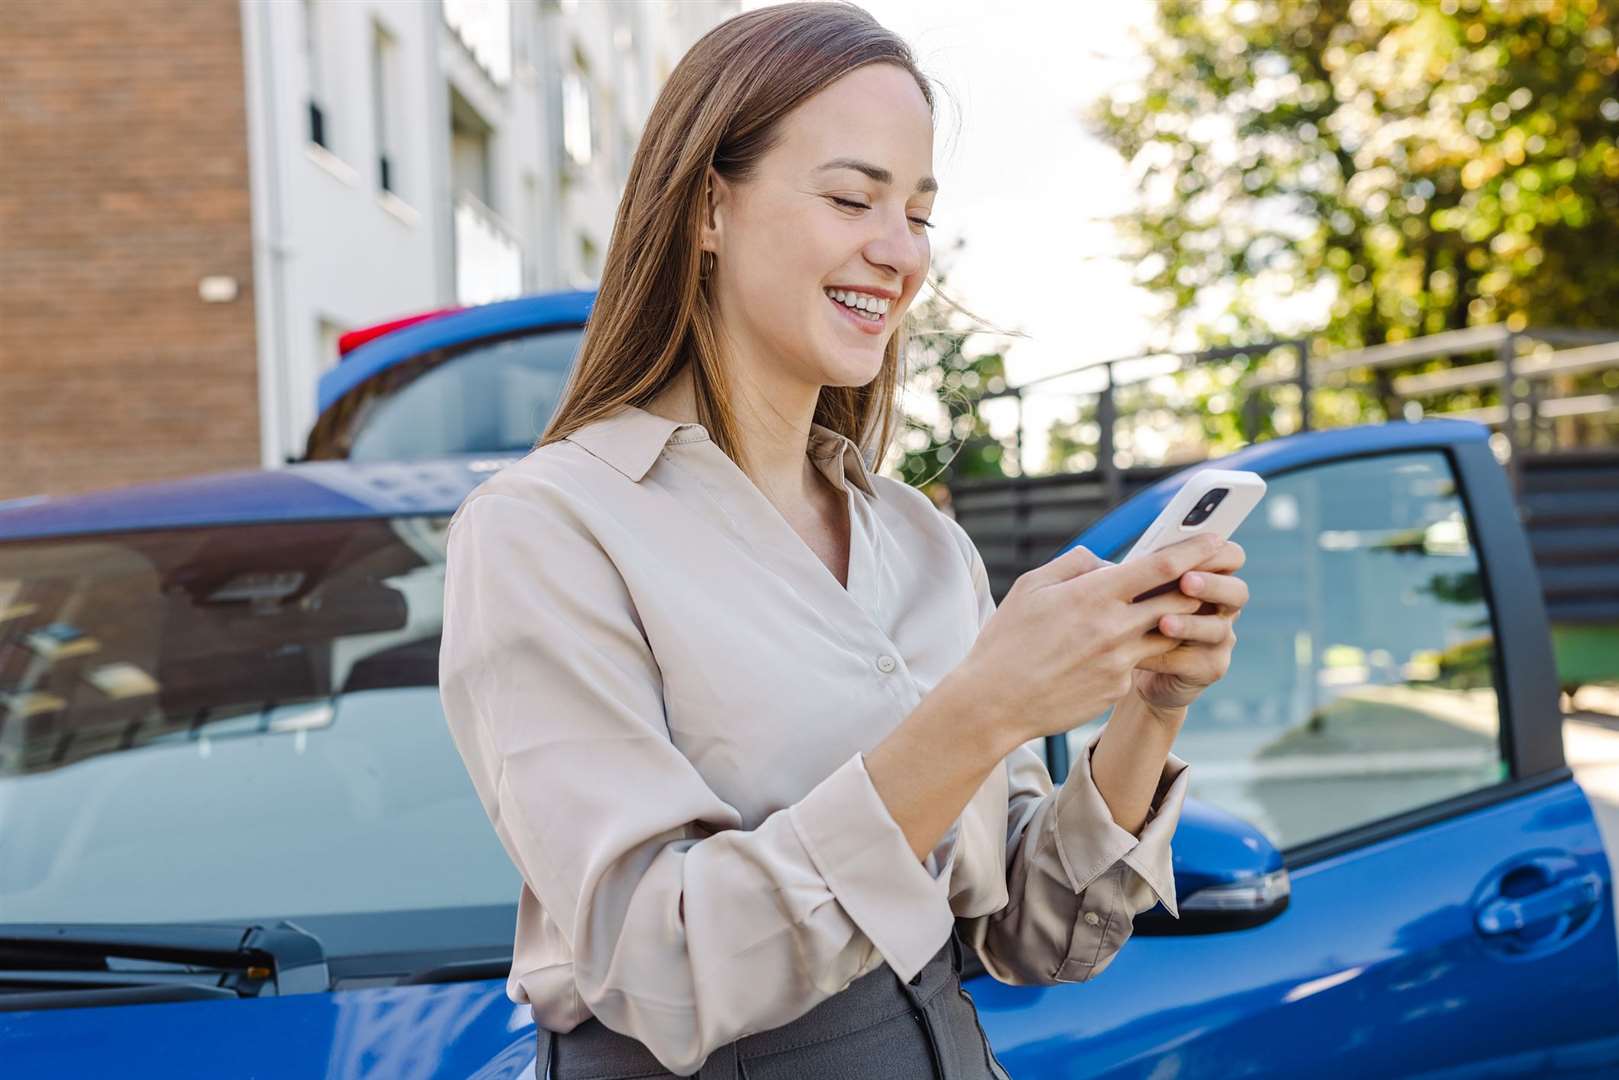 Just Park connects drivers with an available parking space within the area they want to leave their car. Image: Stock photo.